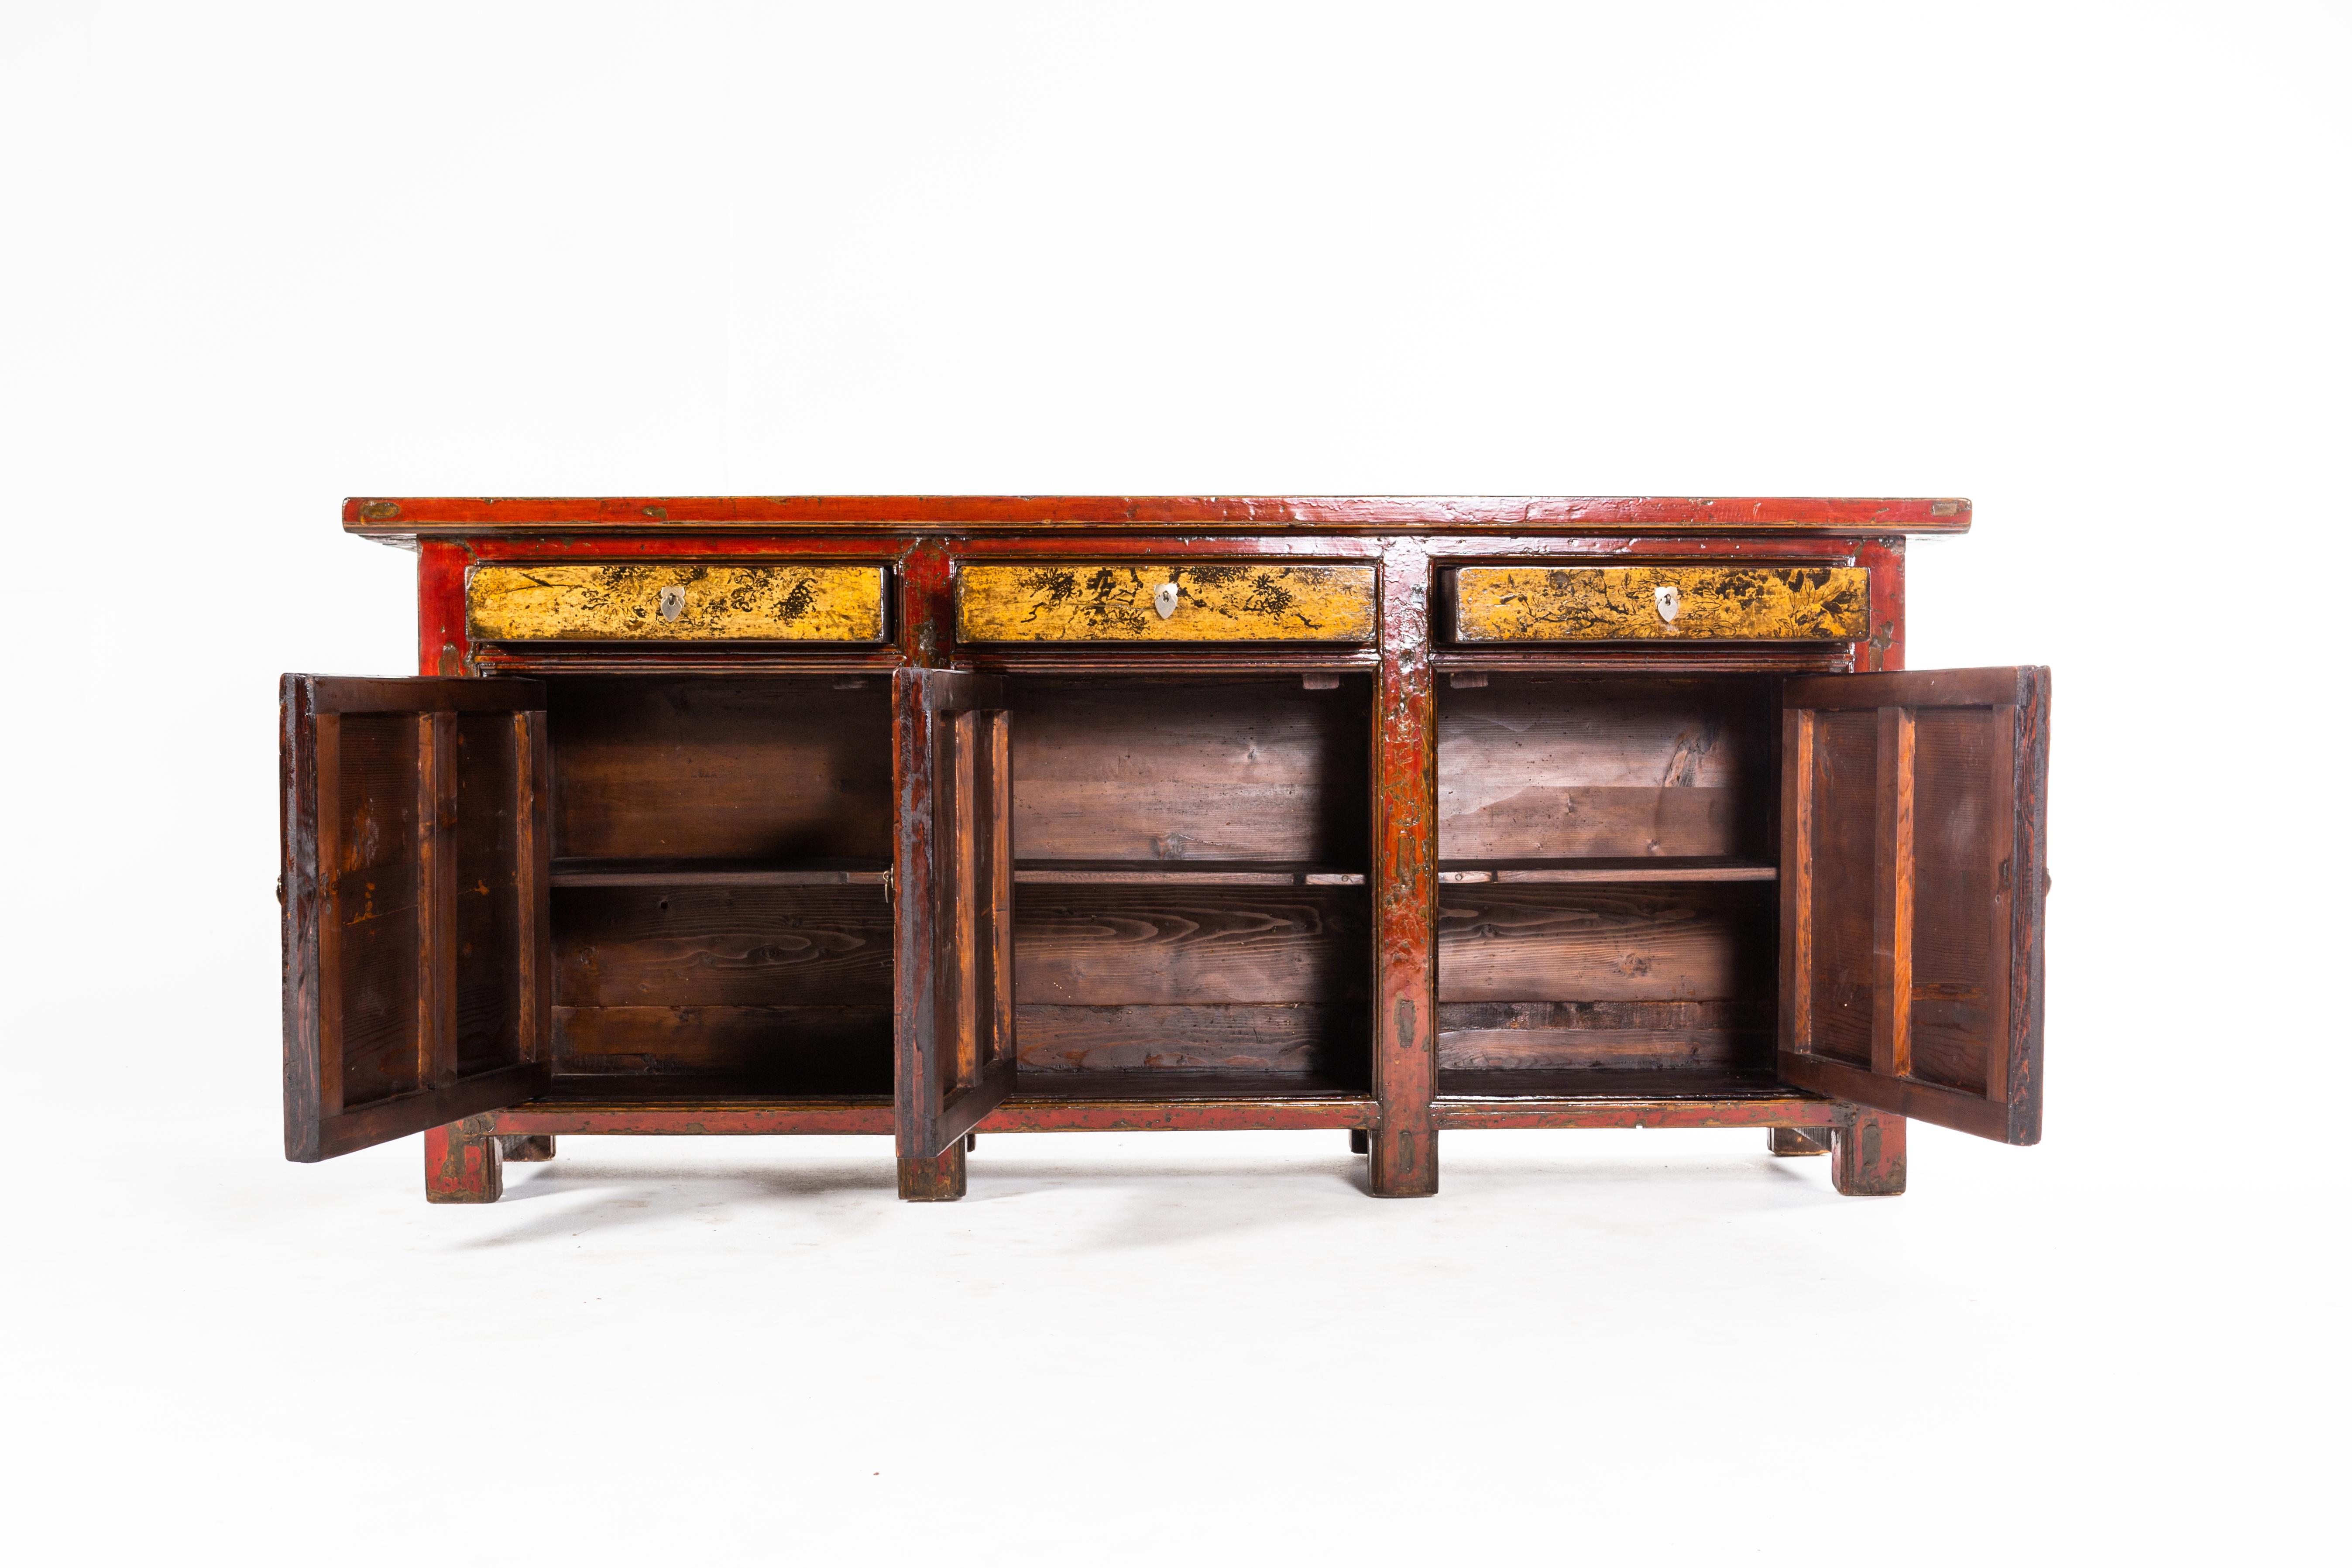 This gorgeous sideboard is from Gunsu, China and was made from pine wood, elmwood, and paint, circa 1920. The piece features a beautifully aged patina, 3 drawers, 3 doors, and shelves. Wear consistent with age and use.